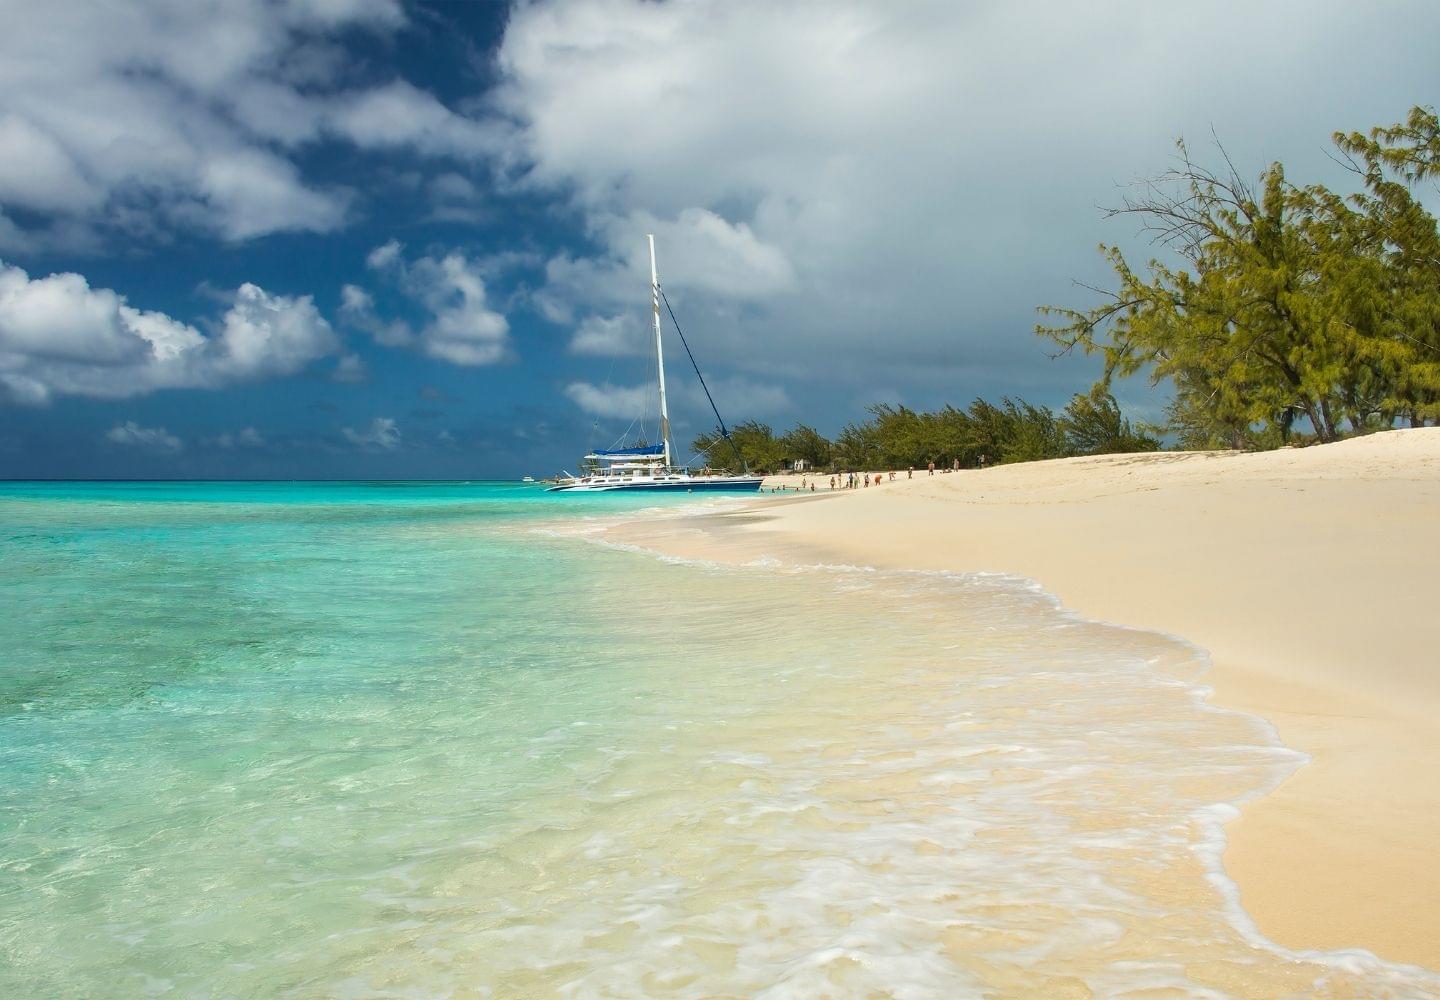 governers beach, grand turk, turks and caicos